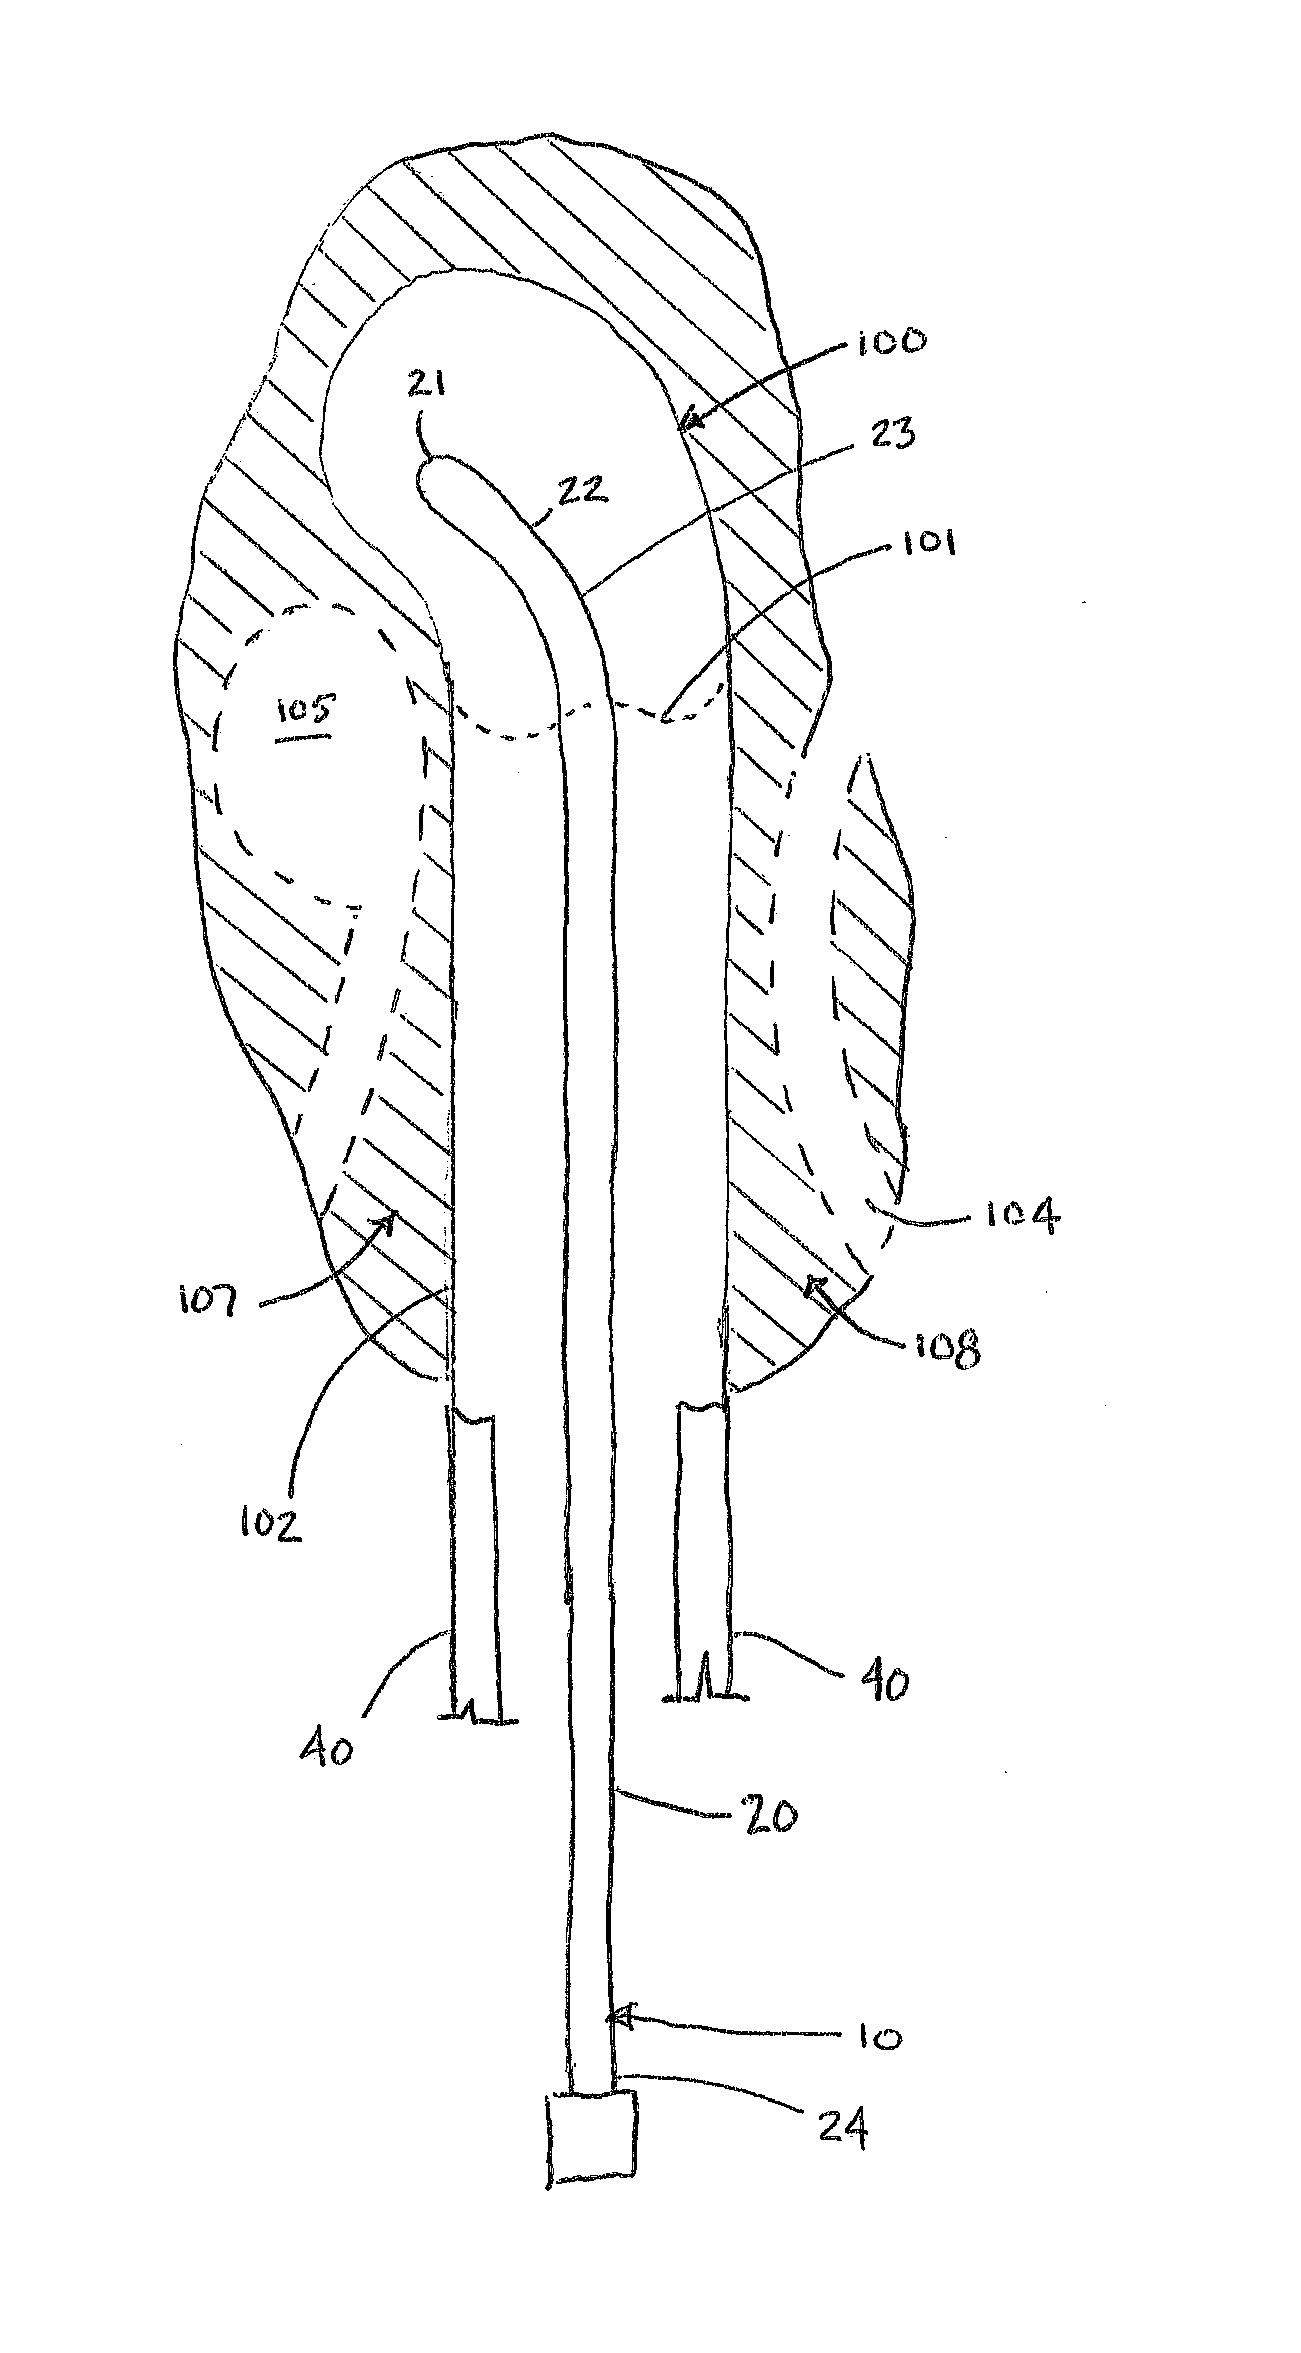 Intracavitary Brachytherapy Device for Insertion in a Body Cavity and Methods of Use Thereof